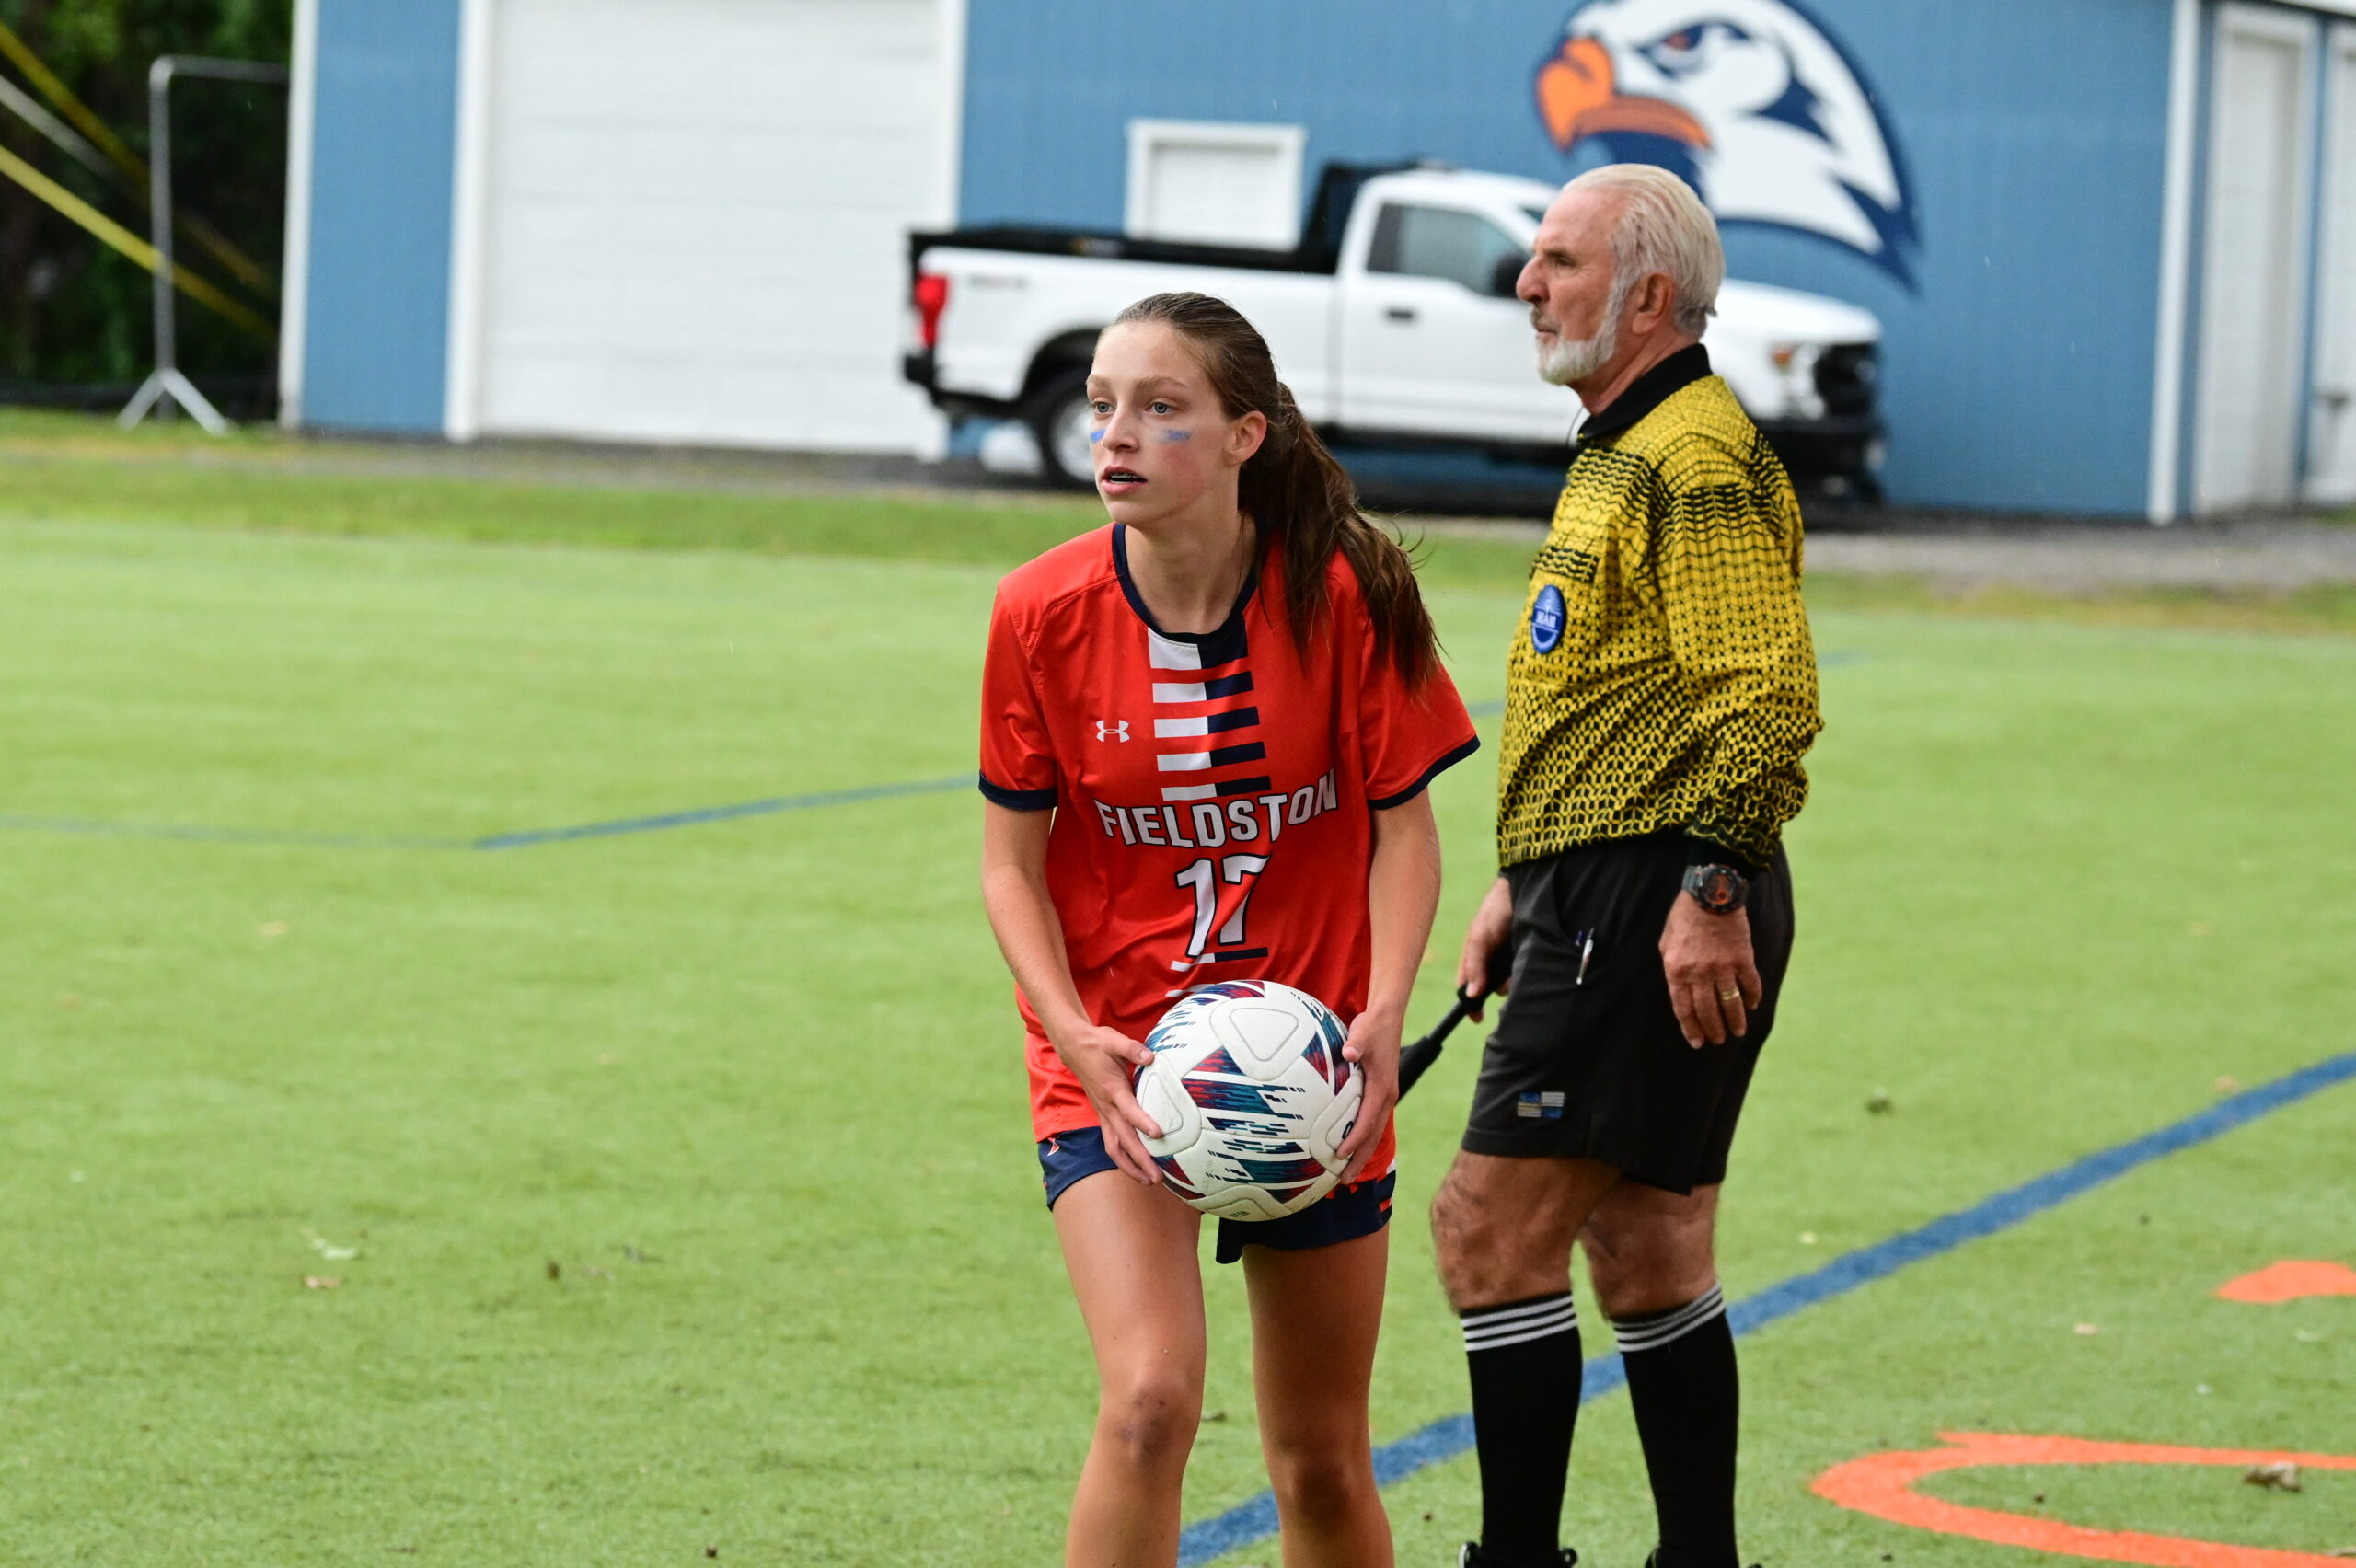 A player on the girls soccer team gets ready to throw the ball back onto the field from the sidelines